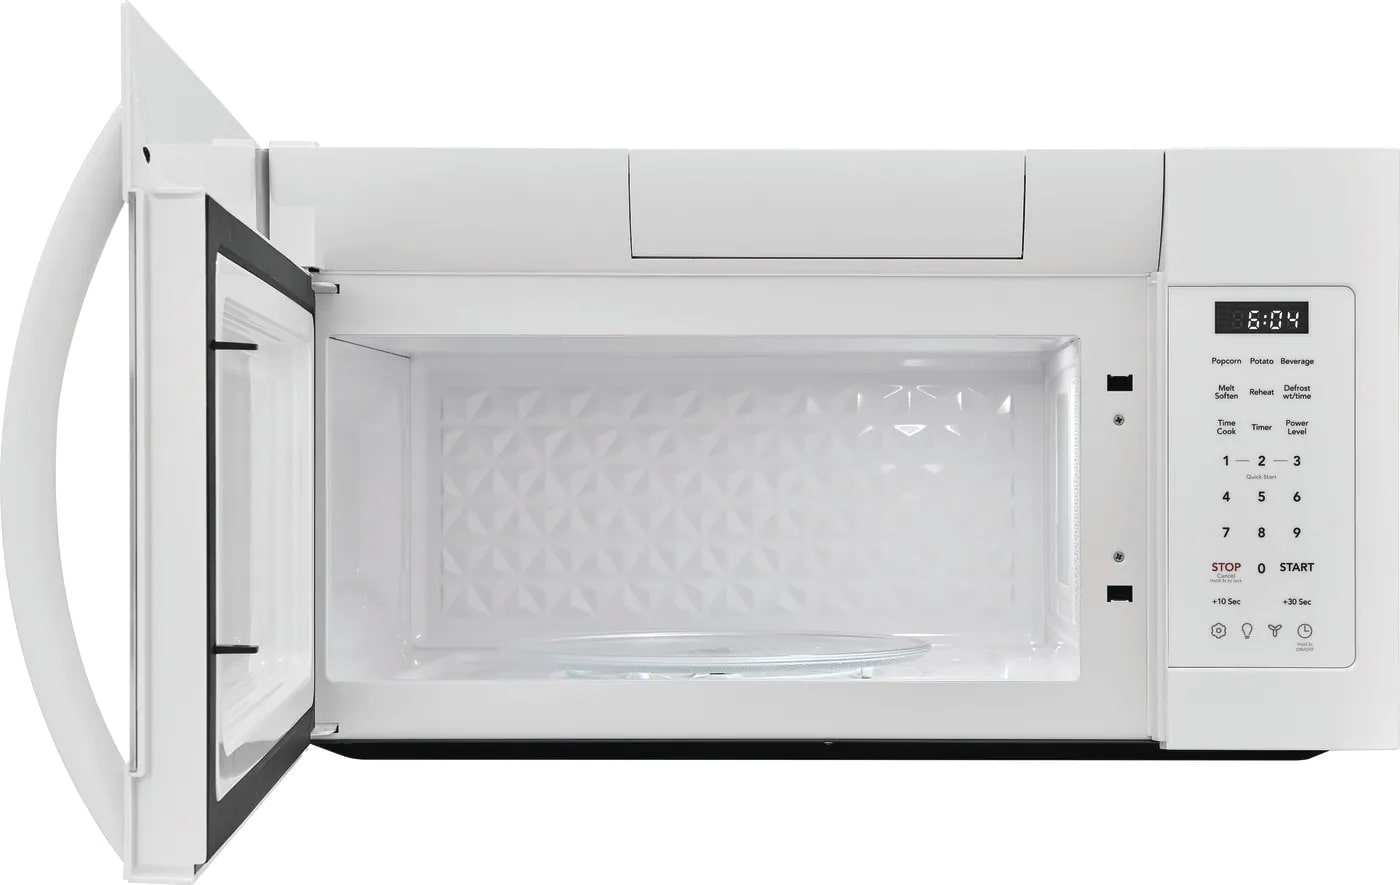 Frigidaire - 1.8 cu. Ft  Over the range Microwave in White - FMOS1846BW